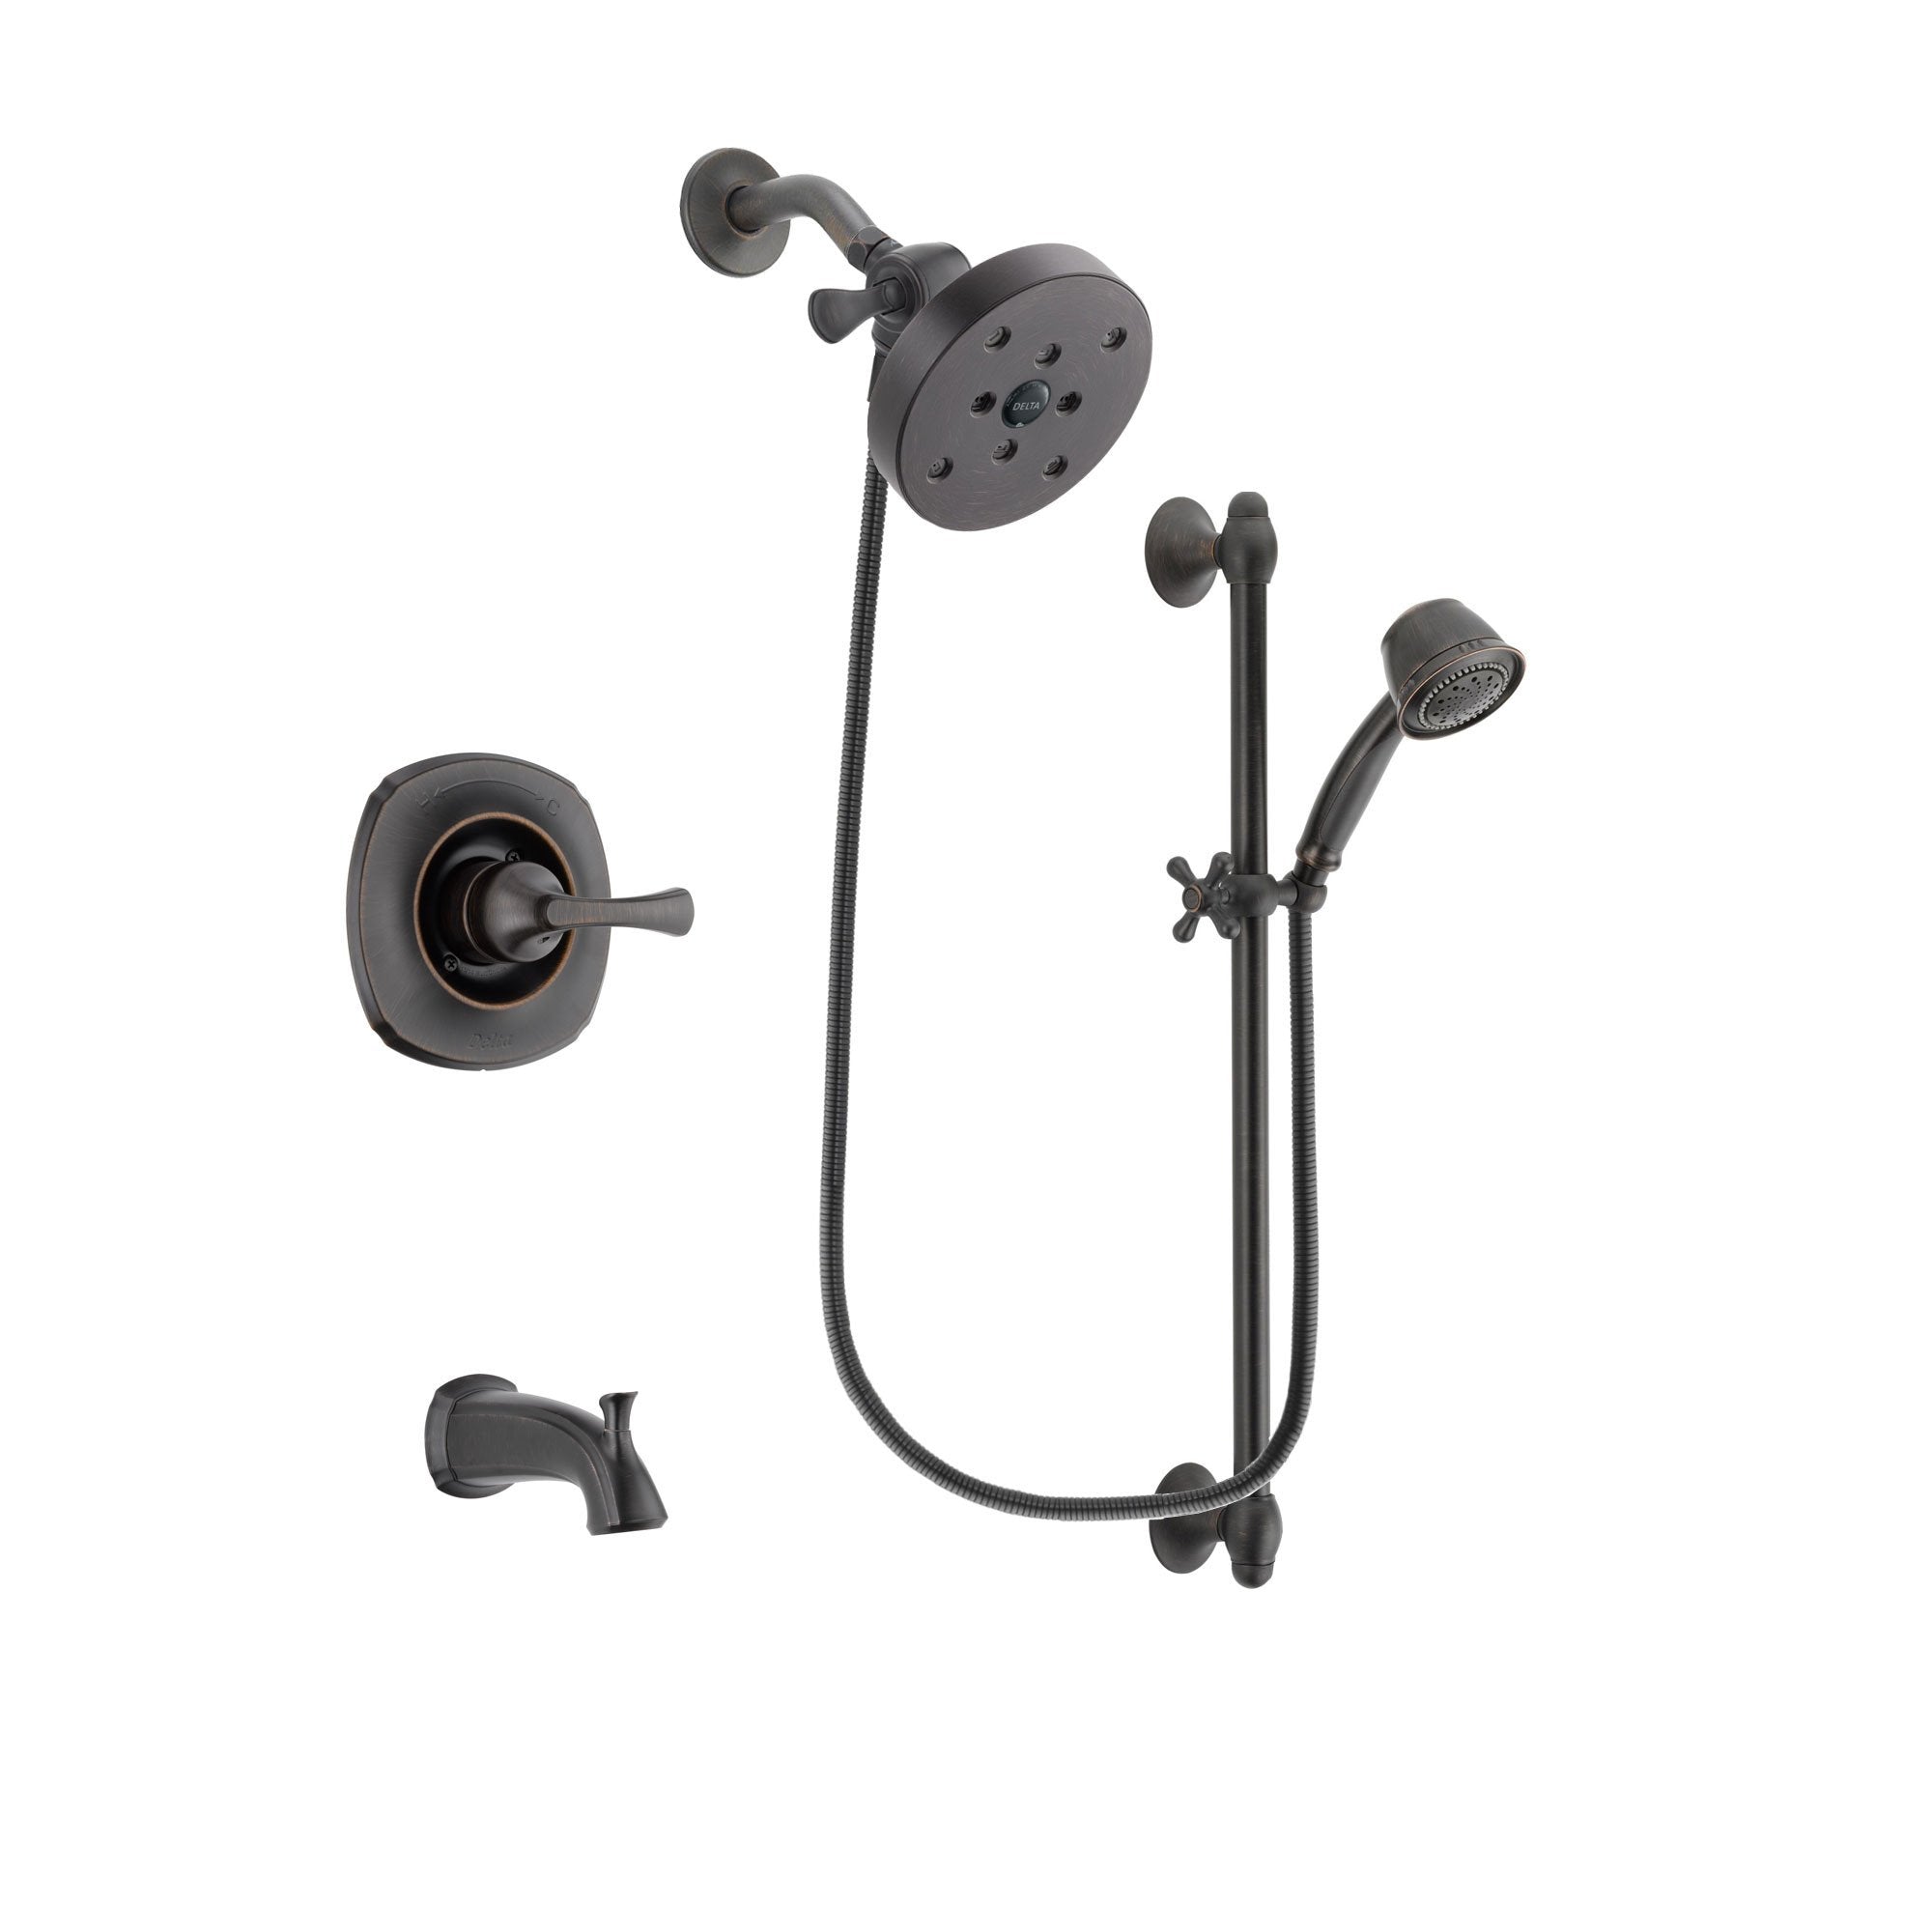 Delta Addison Venetian Bronze Finish Tub and Shower Faucet System Package with 5-1/2 inch Showerhead and 5-Spray Personal Handshower with Slide Bar Includes Rough-in Valve and Tub Spout DSP2605V